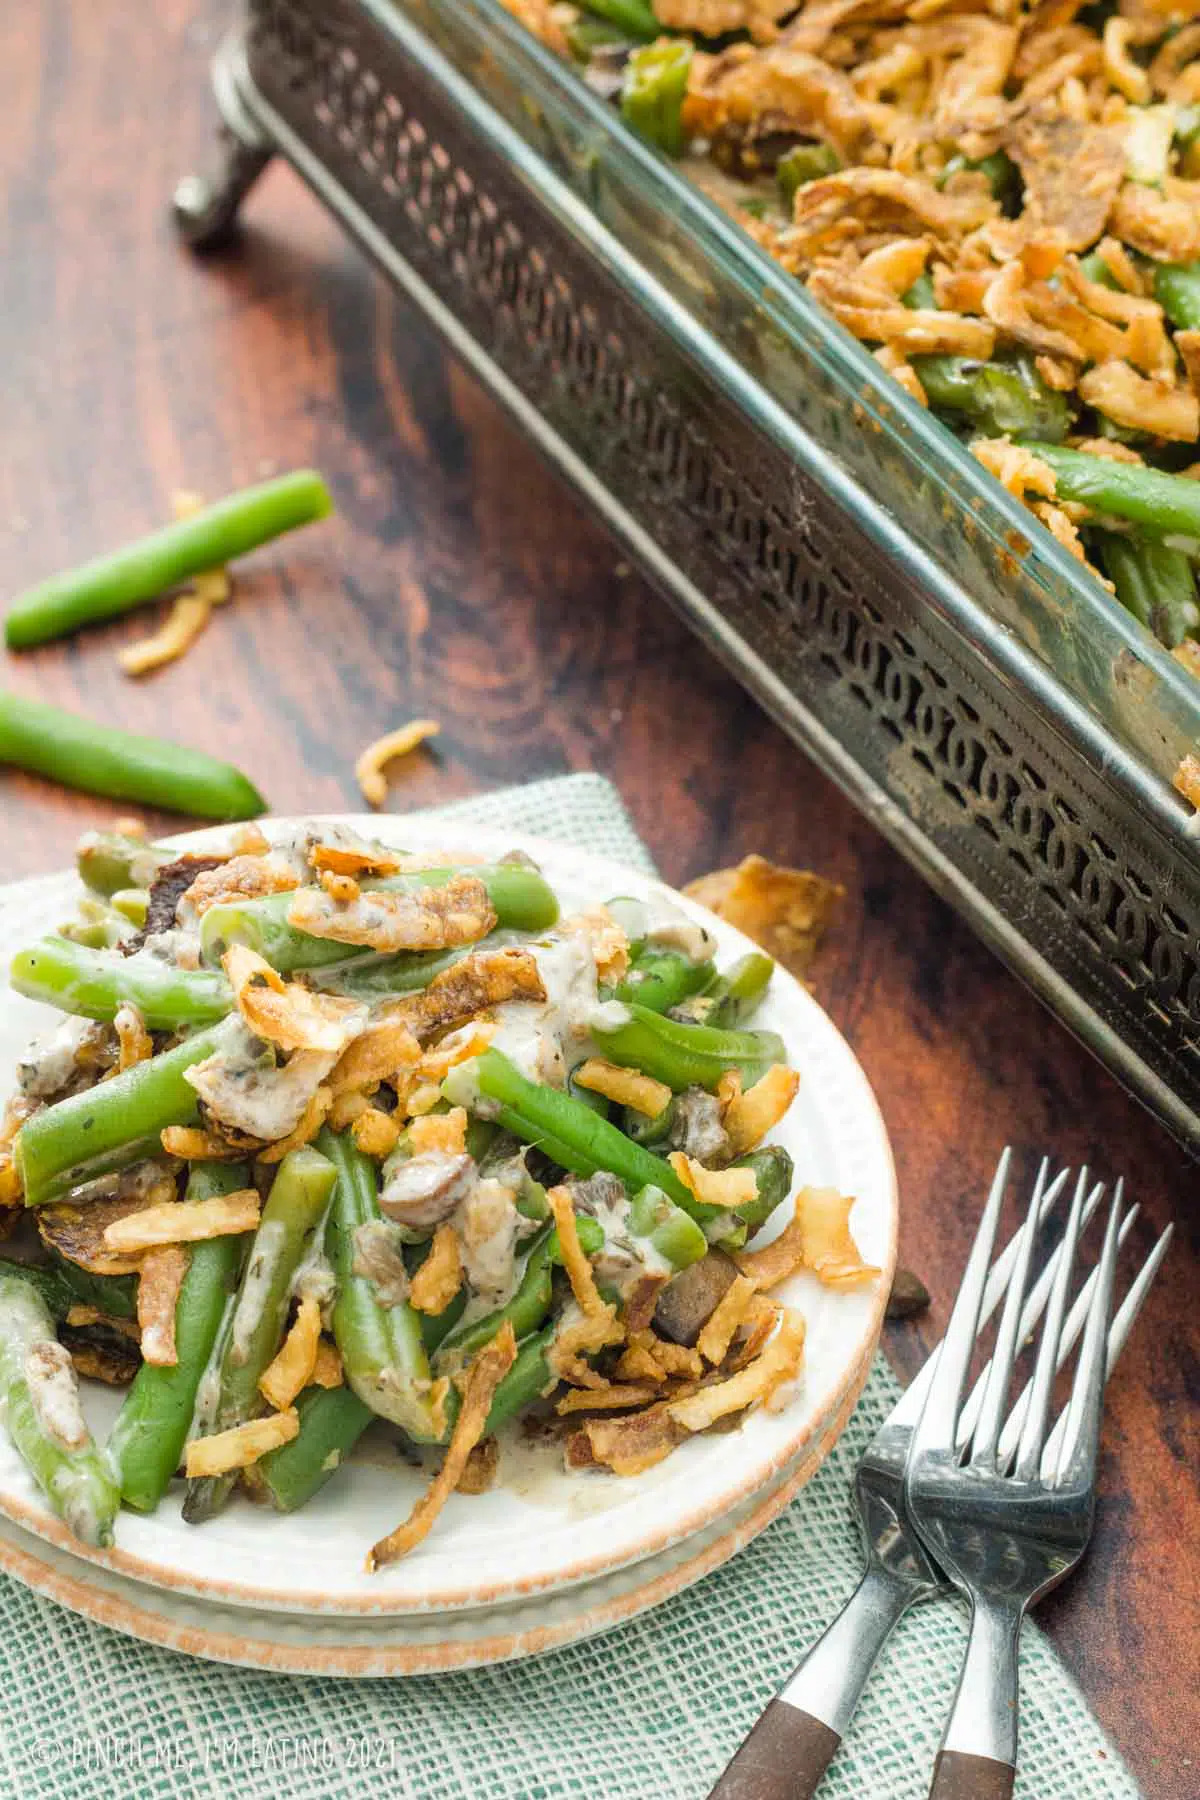 Fresh green bean casserole on a small white plate in front of a decorative casserole dish.